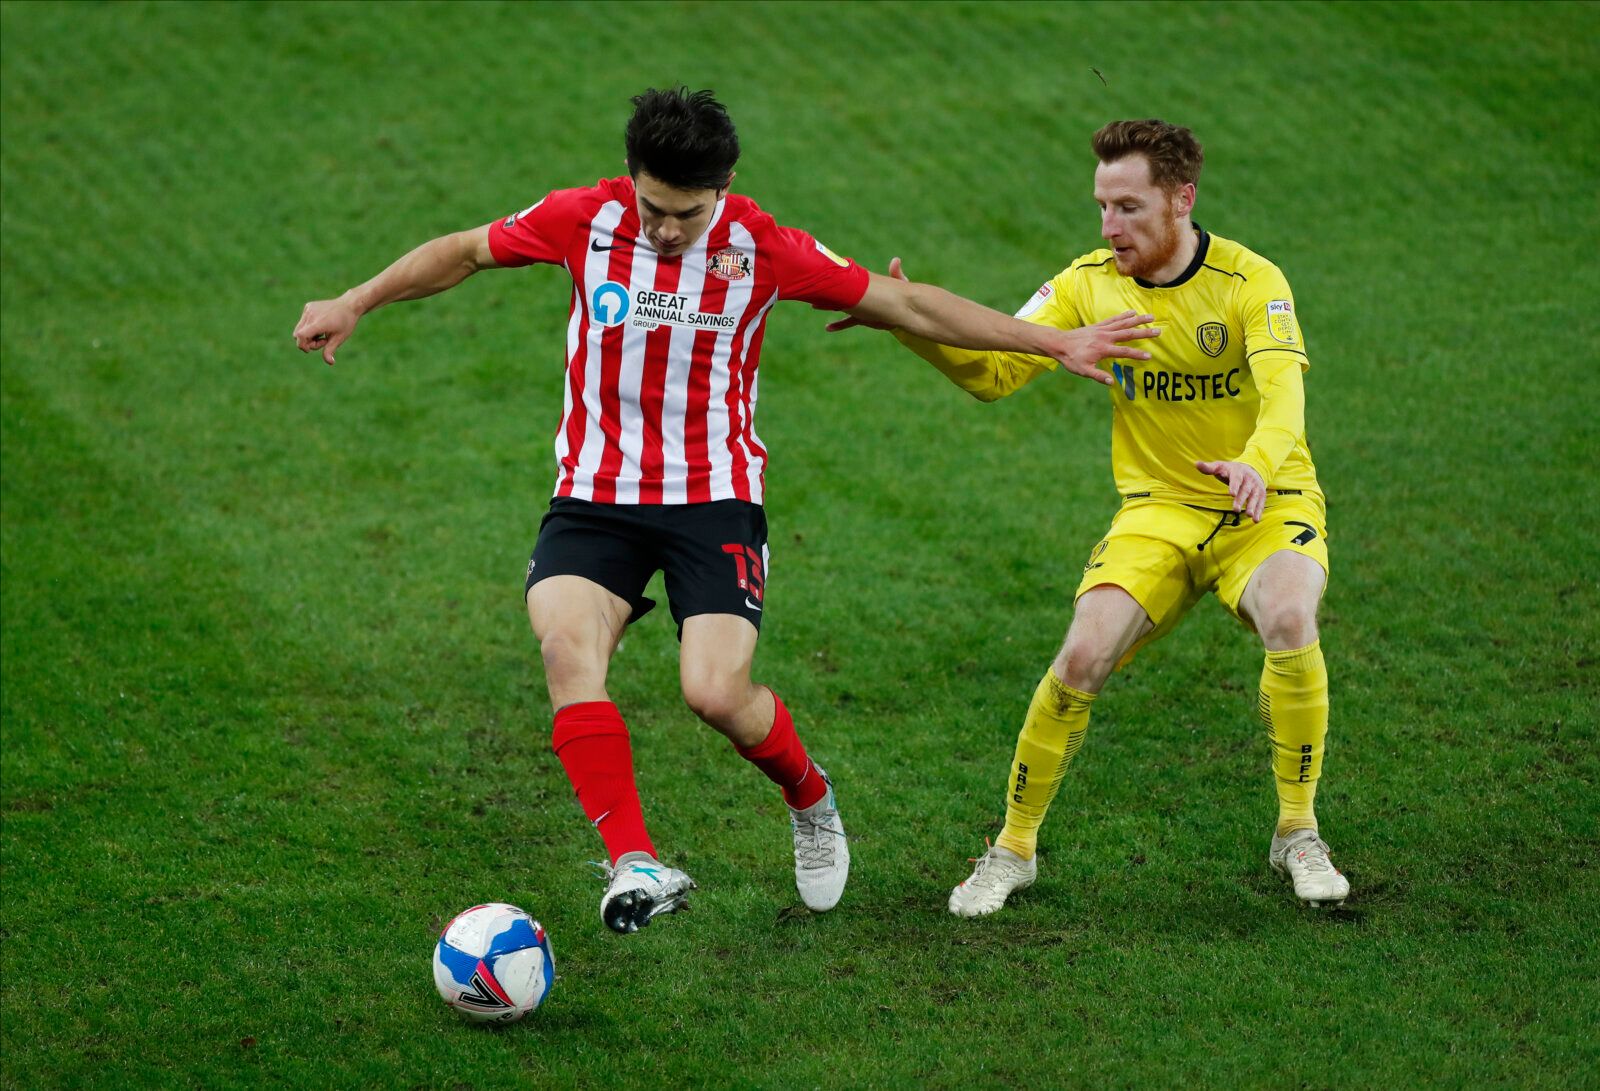 Soccer Football - League One - Sunderland v Burton Albion - Stadium of Light, Sunderland, Britain - December 1, 2020 Sunderland's Luke O'Nien in action with Burton Albion's Stephen Quinn Action Images/Lee Smith EDITORIAL USE ONLY. No use with unauthorized audio, video, data, fixture lists, club/league logos or 'live' services. Online in-match use limited to 75 images, no video emulation. No use in betting, games or single club /league/player publications.  Please contact your account representat